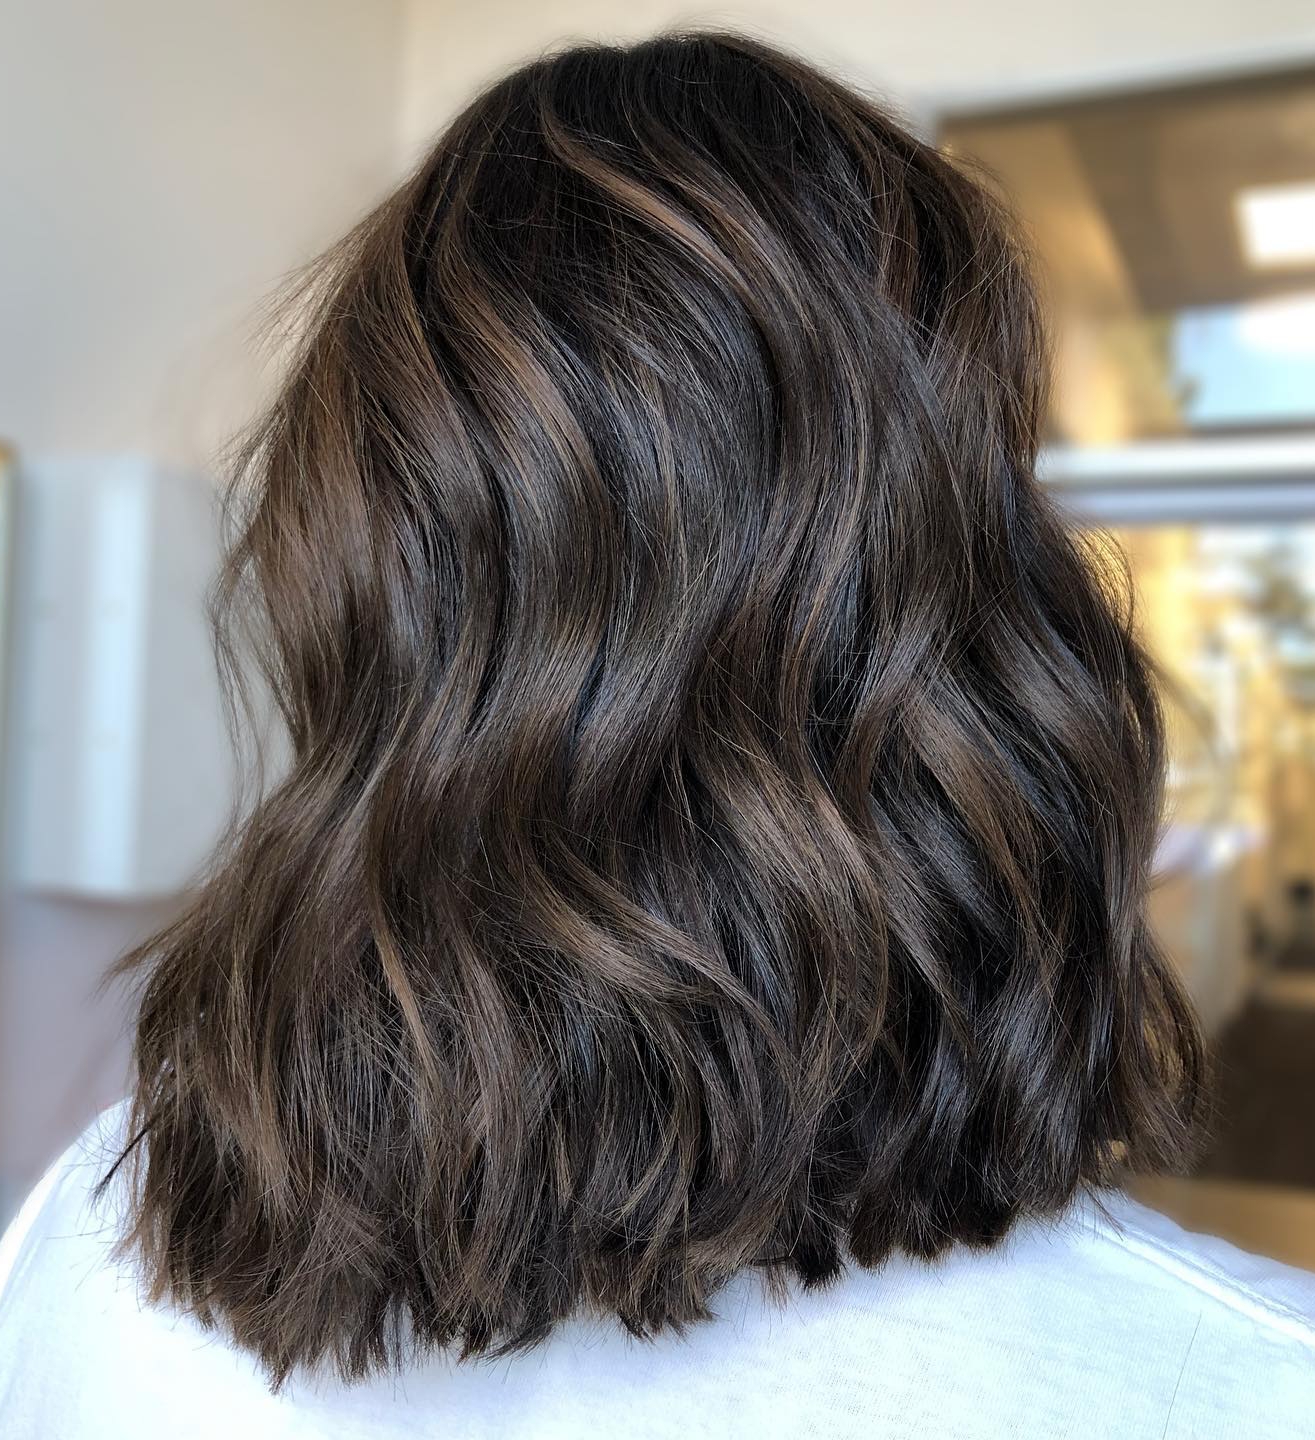 Coffee Brown Lowlights and Blonde Highlights on Short Thick Lob